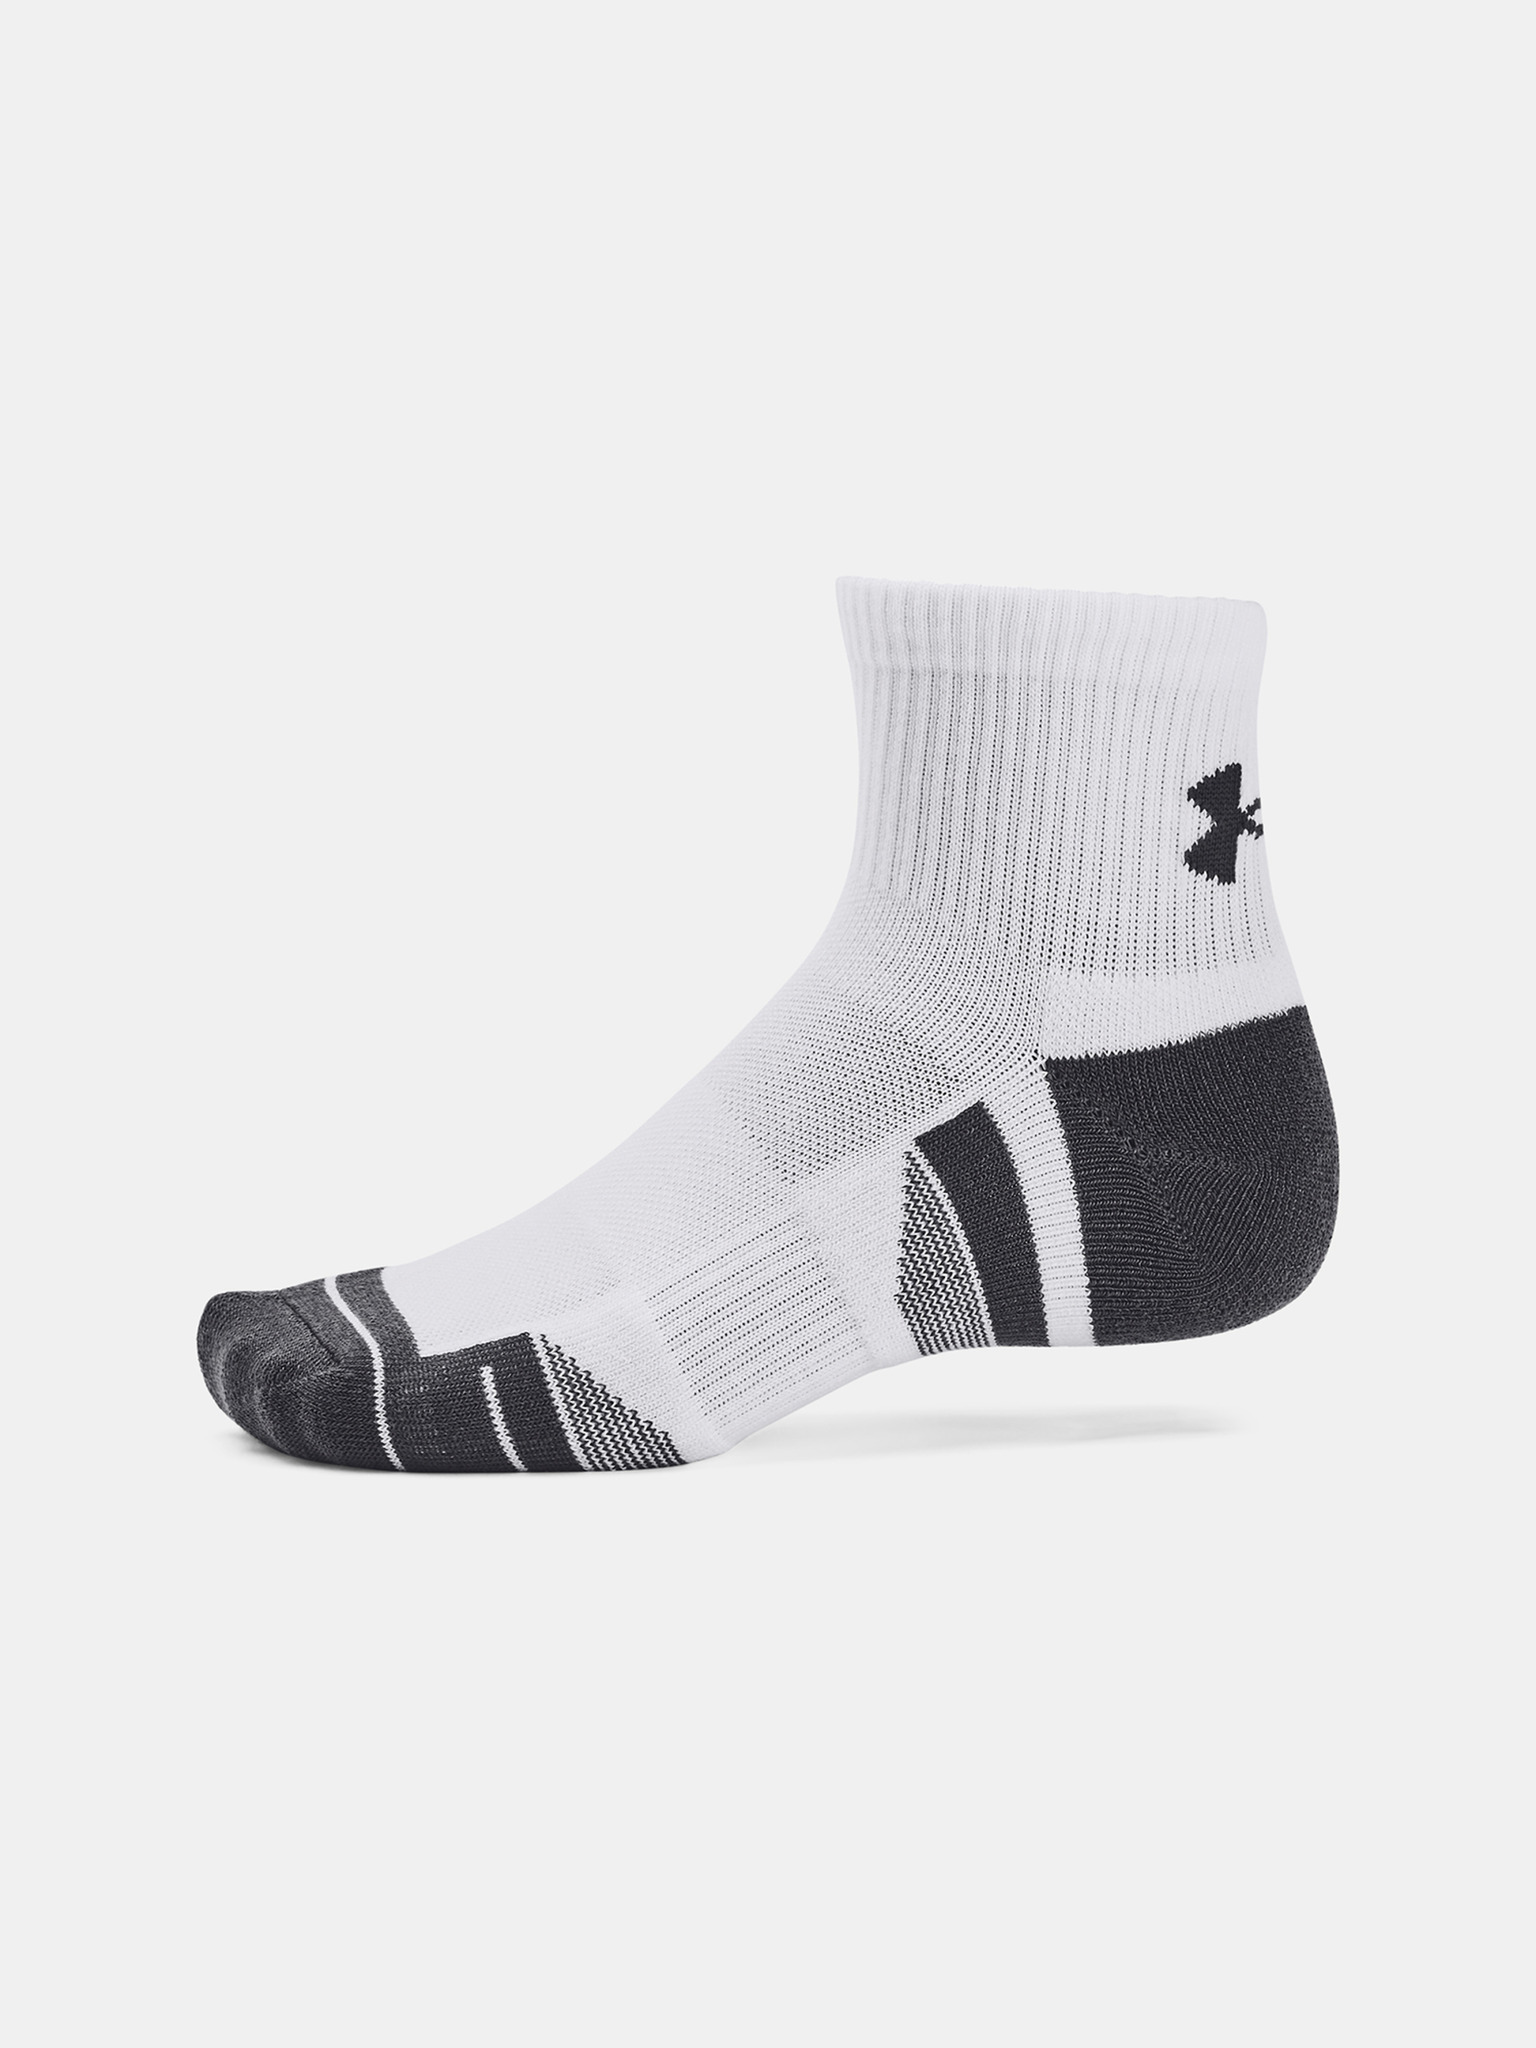 Under Armour - UA Performance Tech Qtr Set of 3 pairs of socks